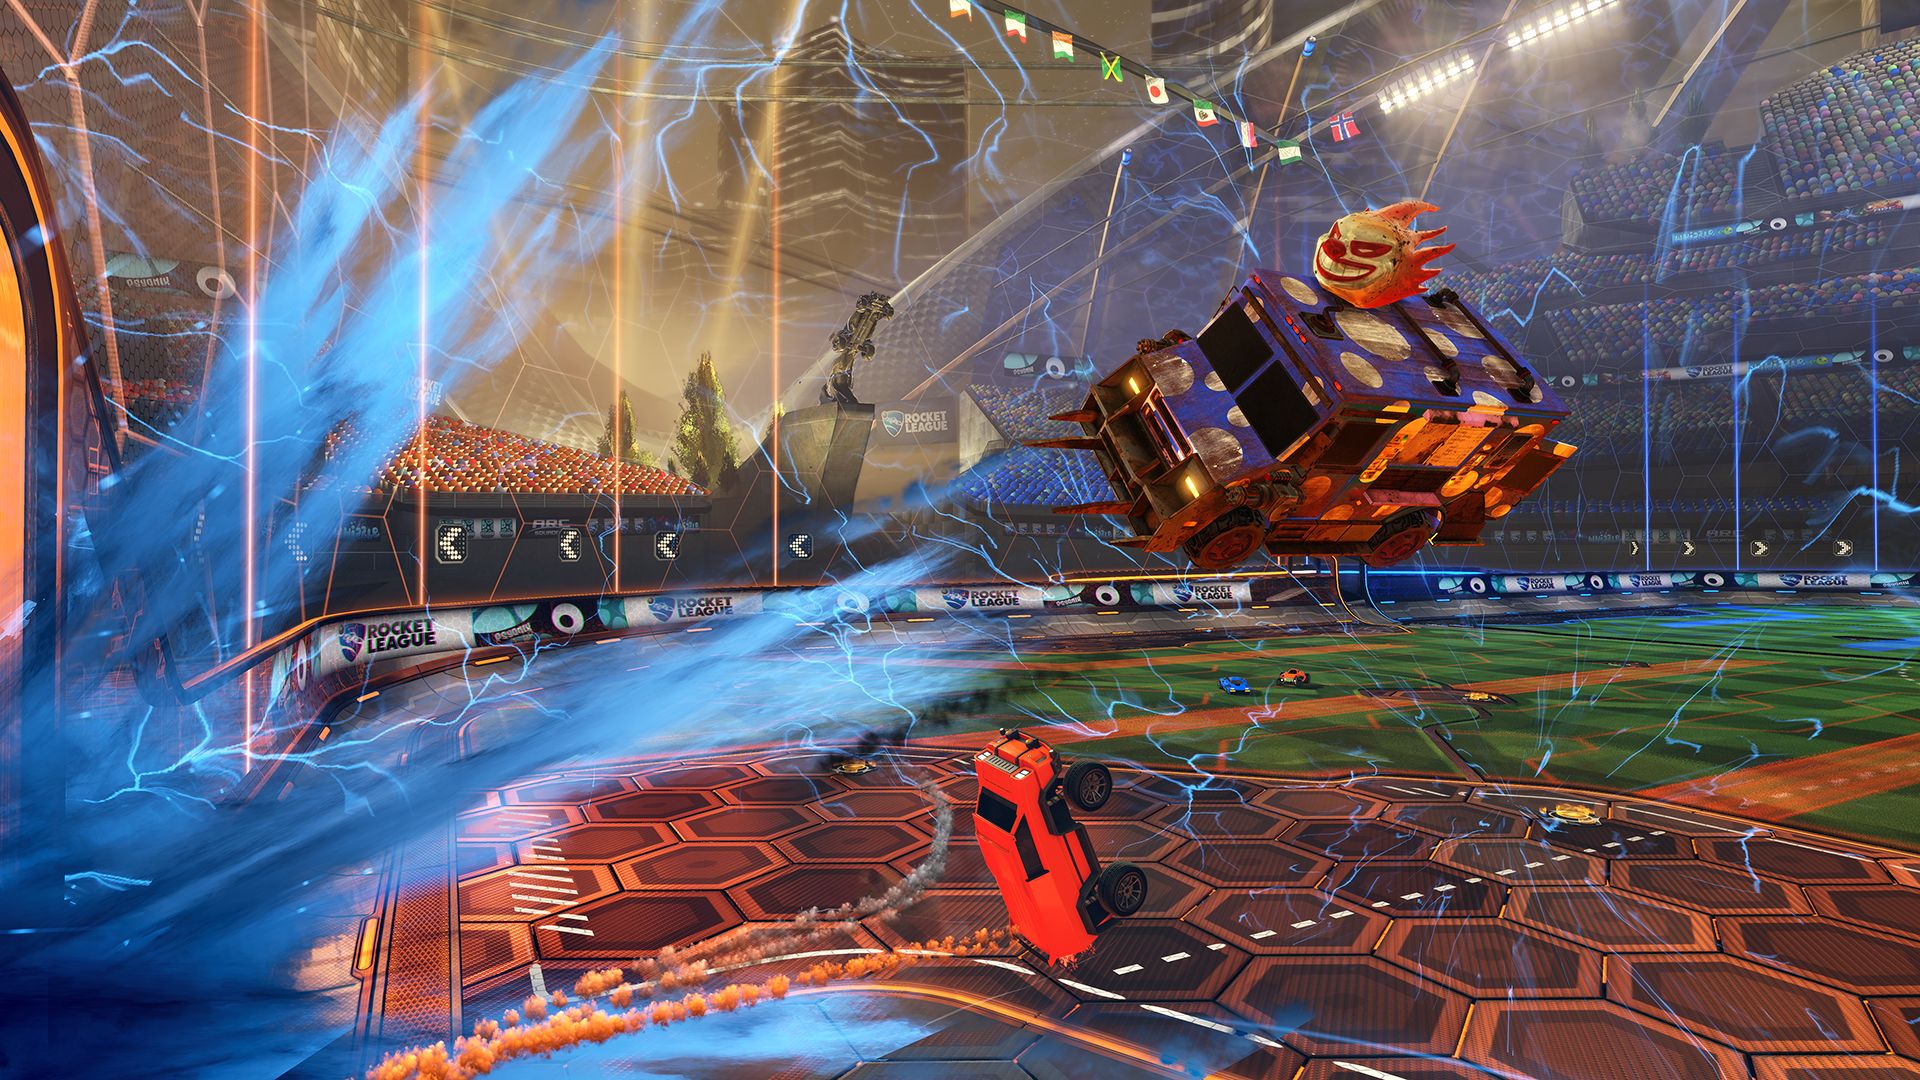 Image for Rocket League PS4 Pro 4K Analysis